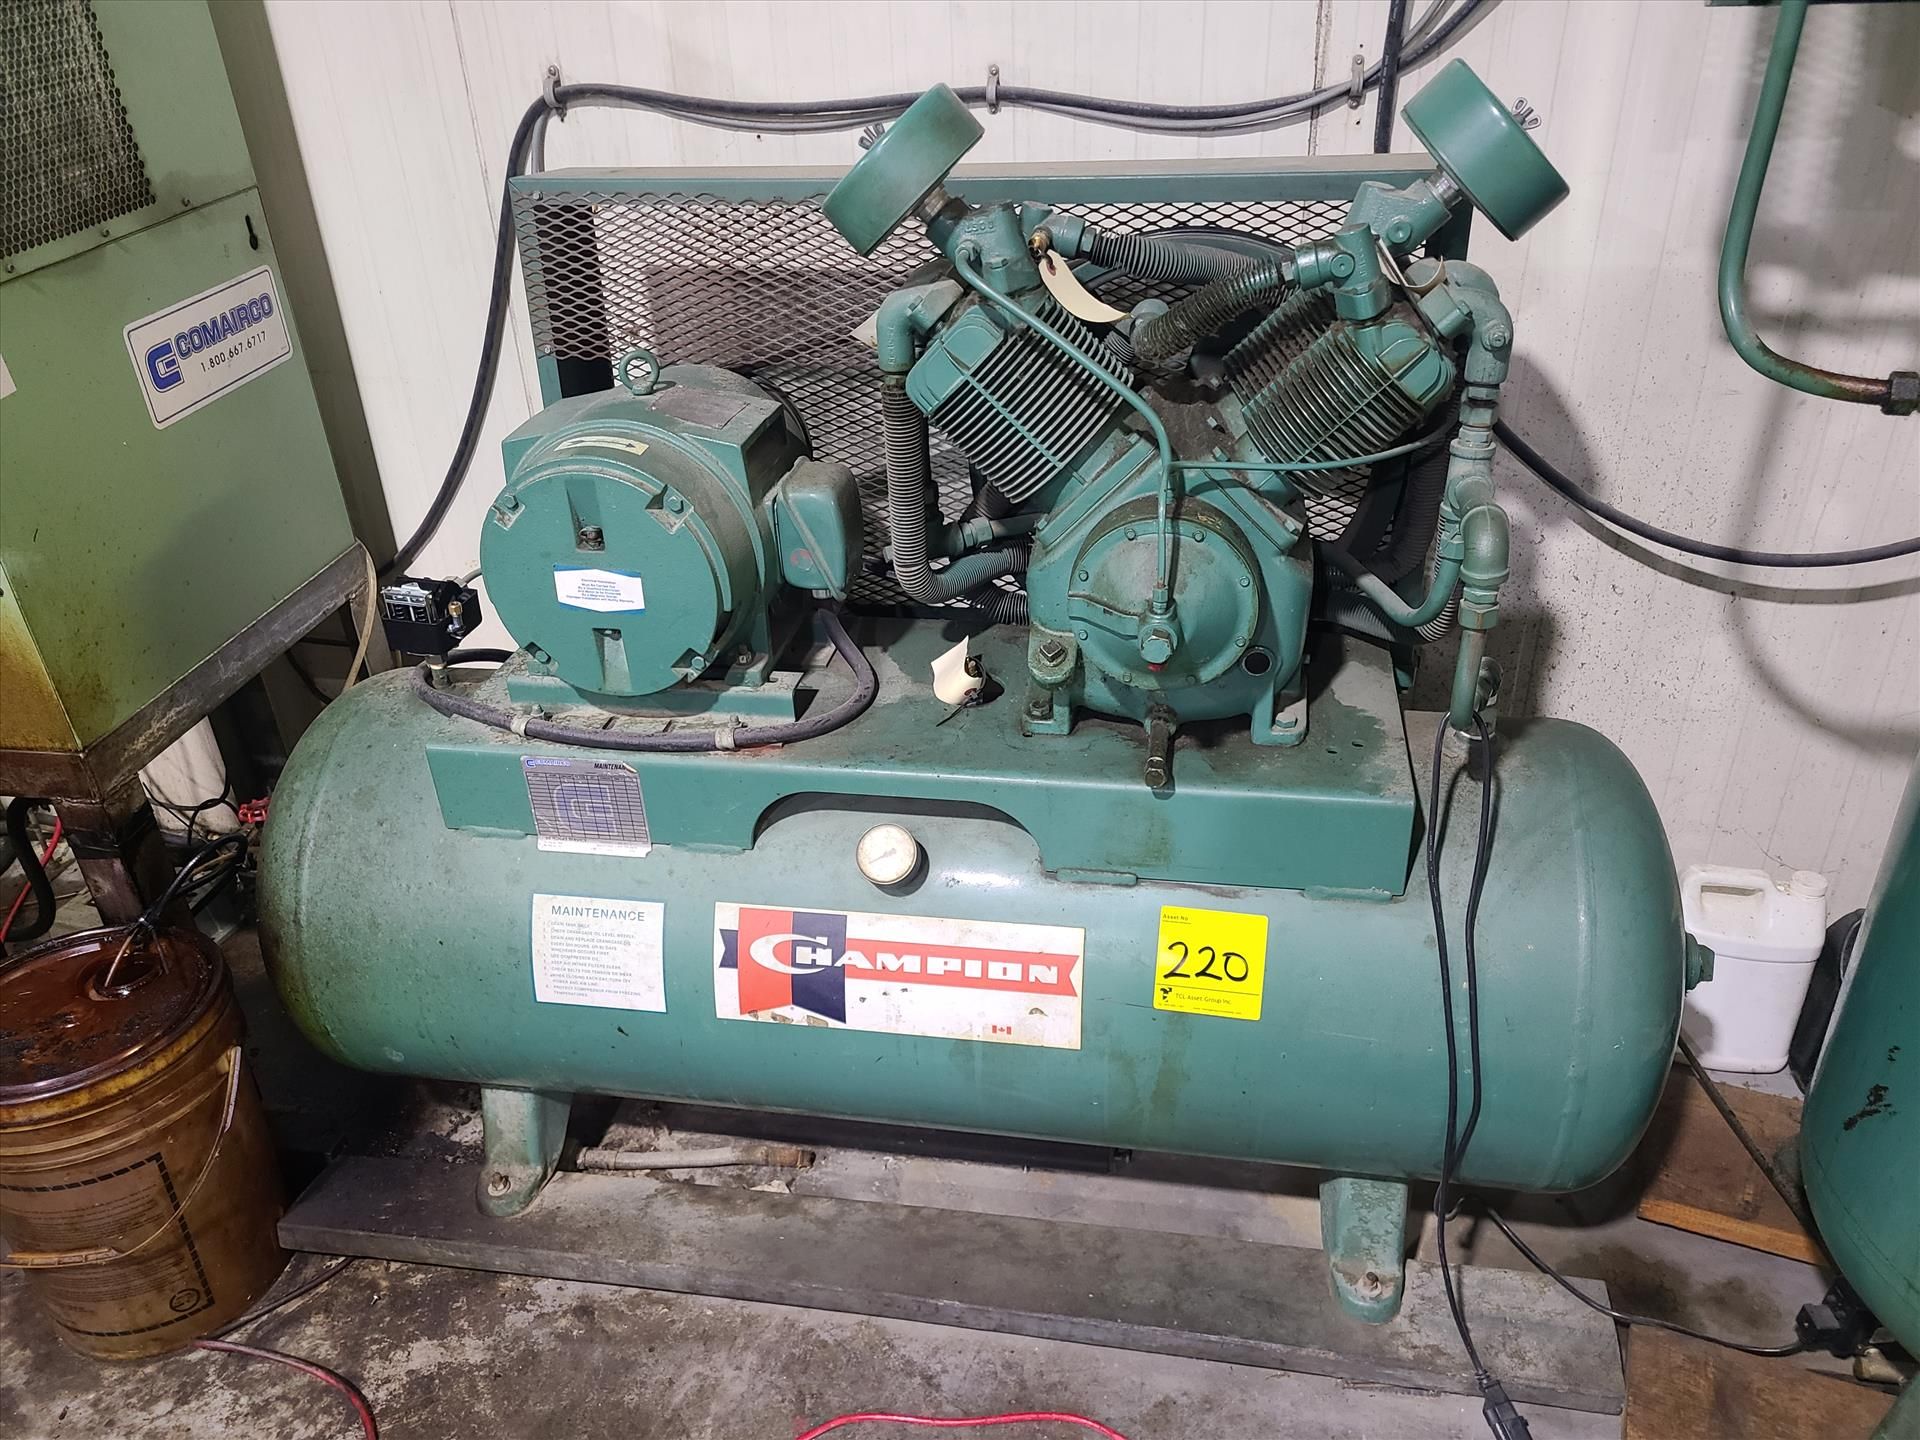 Champion air compressor, 10 hp, tank mounted [Refrigeration Area]